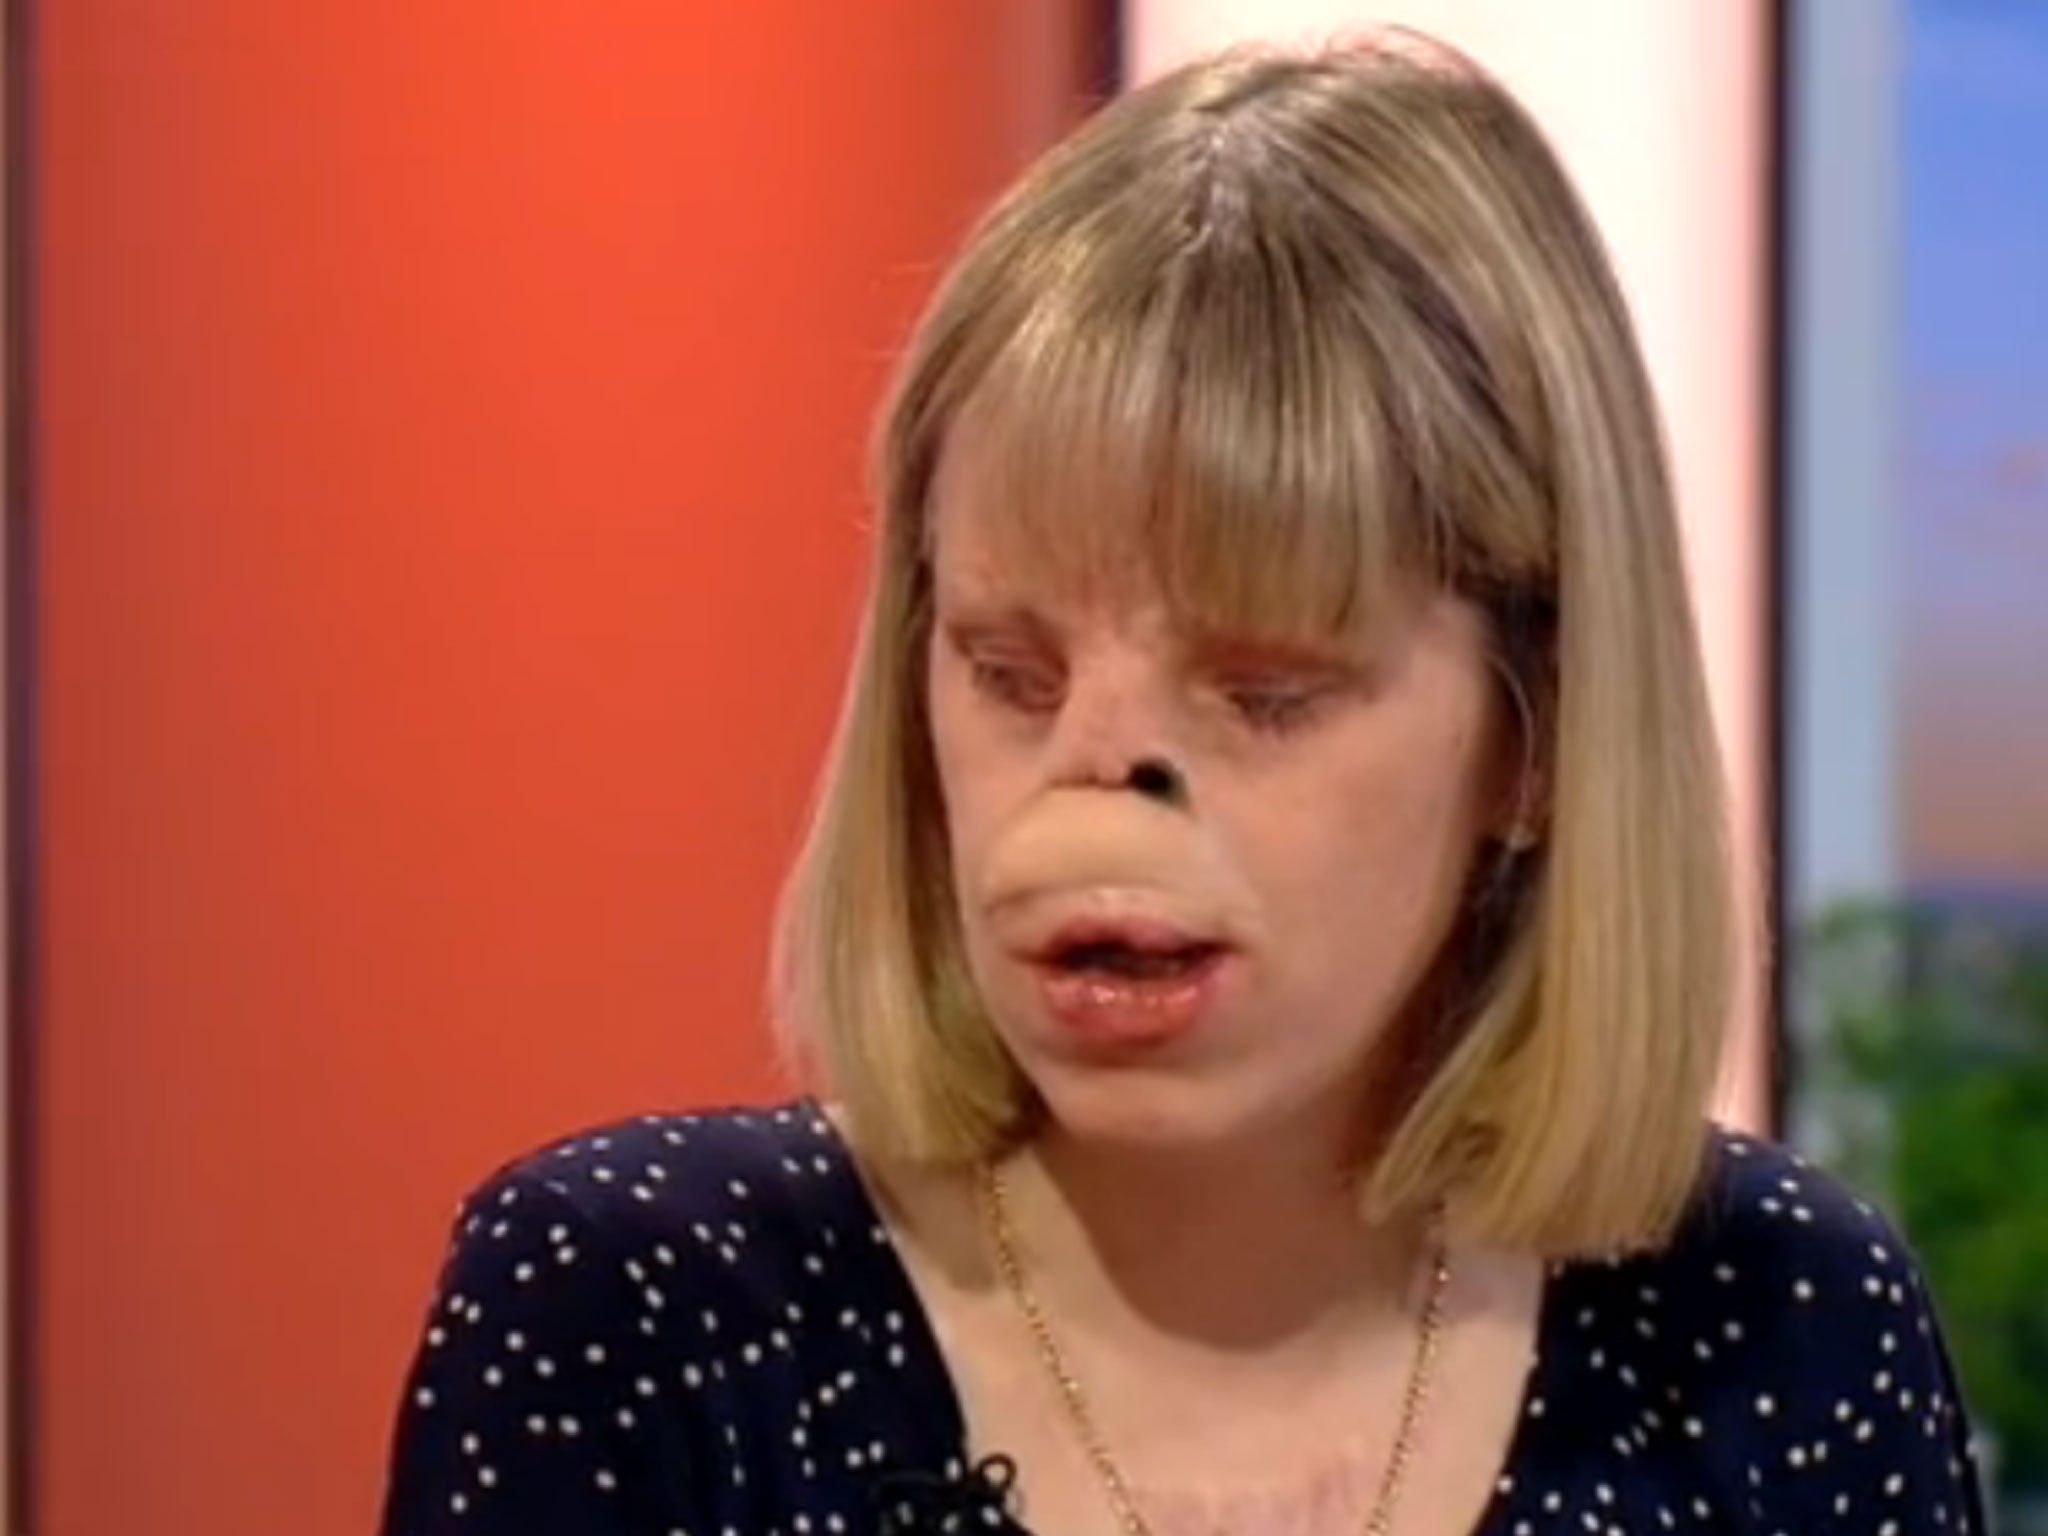 Lauren Wigglesworth, who planned to fly to Majorca in May, on BBC Breakfast